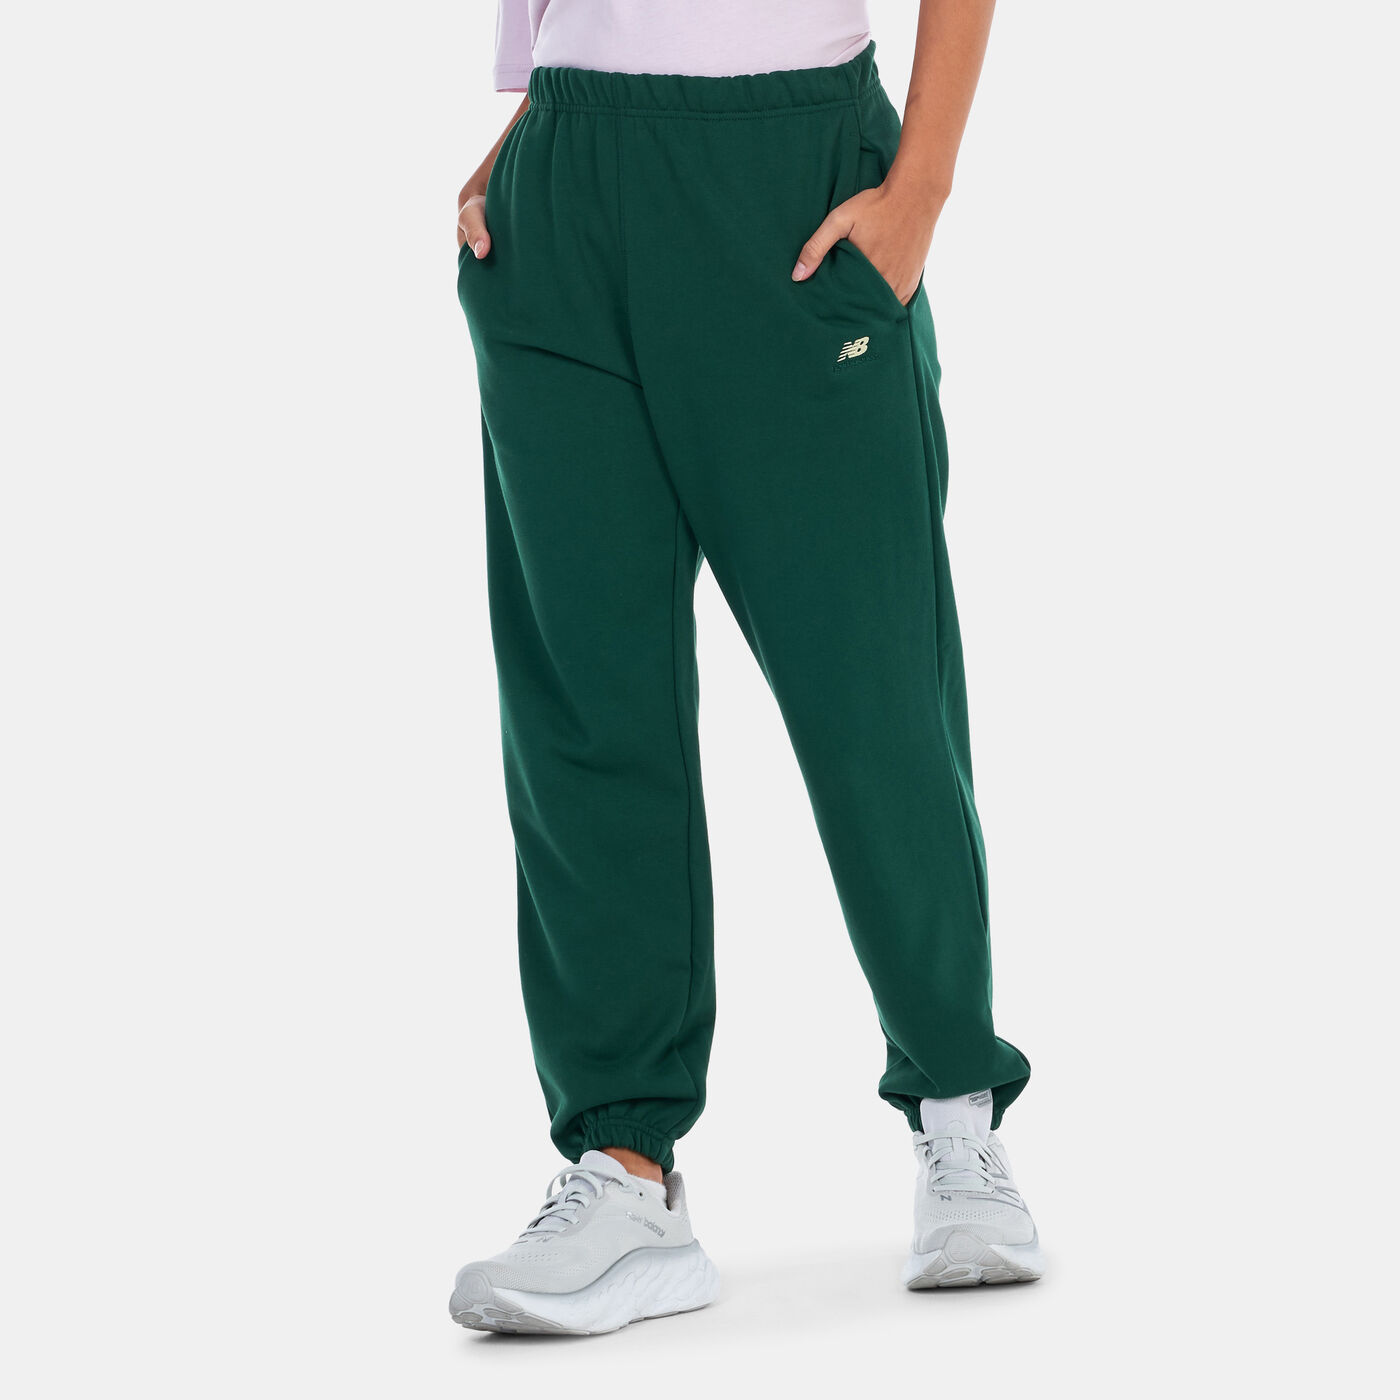 Women's Athletics Remastered French Terry Pants